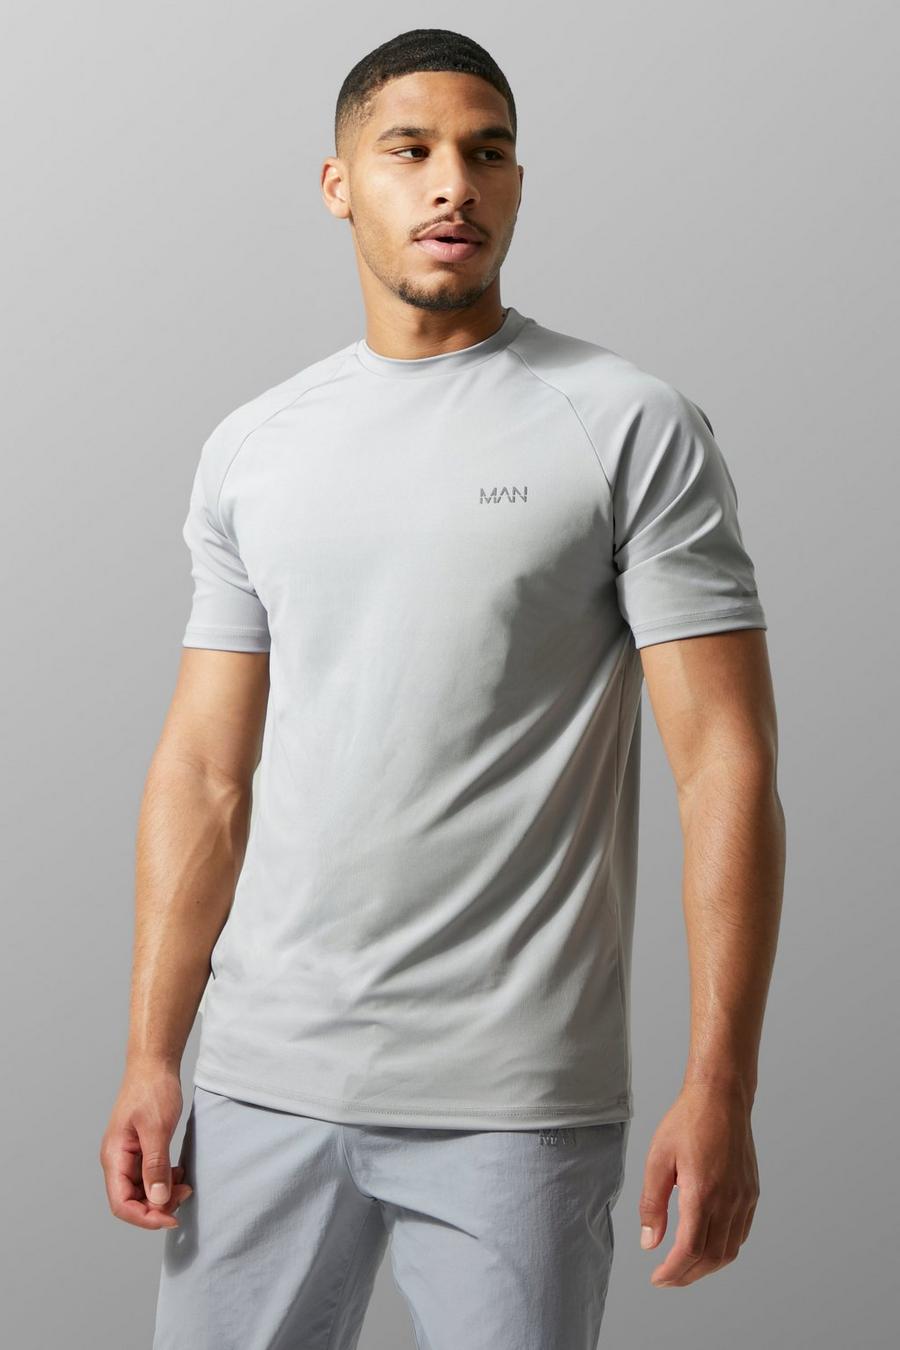 Grey Going Out Shirts